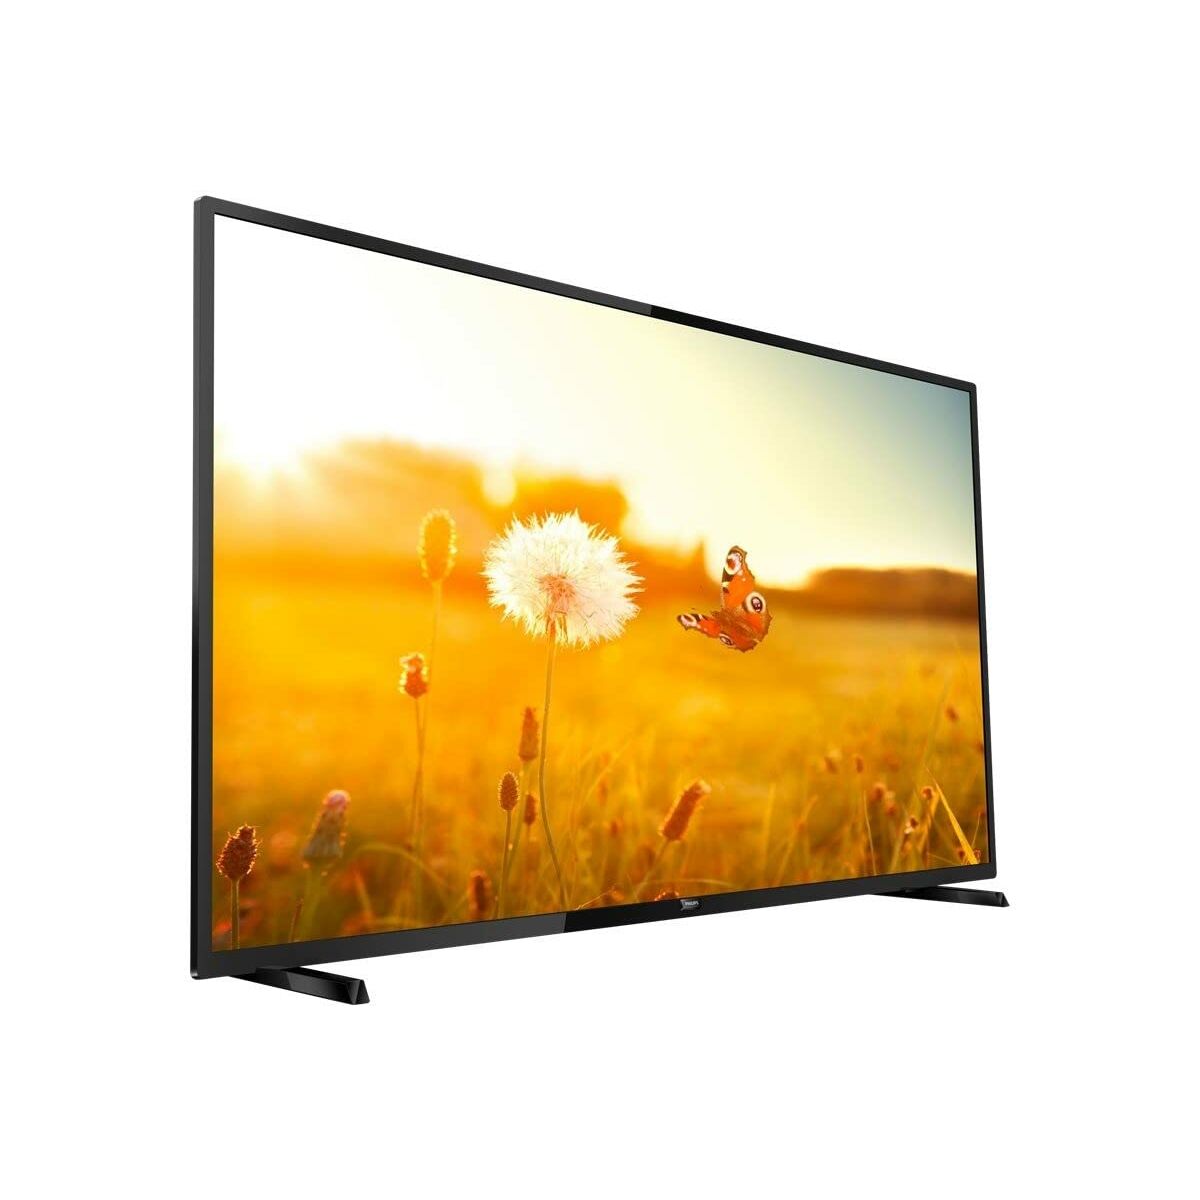 Smart TV Philips 32HFL3014 HD 32" LED, Philips, Electronics, TV, Video and home cinema, smart-tv-philips-32hfl3014-hd-32-led, :Ultra HD, Brand_Philips, category-reference-2609, category-reference-2625, category-reference-2931, category-reference-t-18805, category-reference-t-19653, cinema and television, Condition_NEW, entertainment, Price_200 - 300, RiotNook